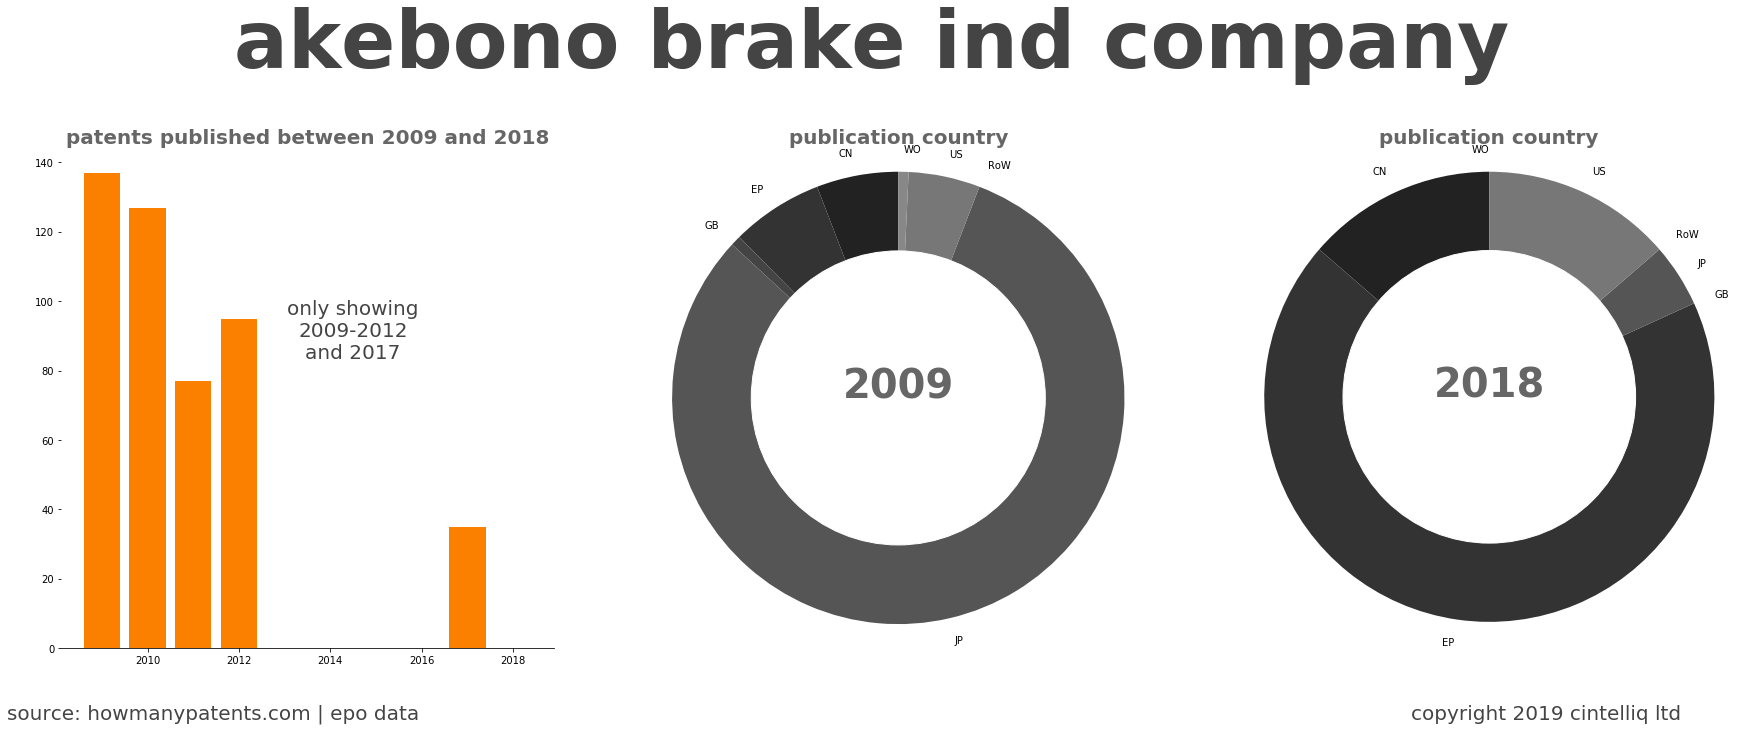 summary of patents for Akebono Brake Ind Company